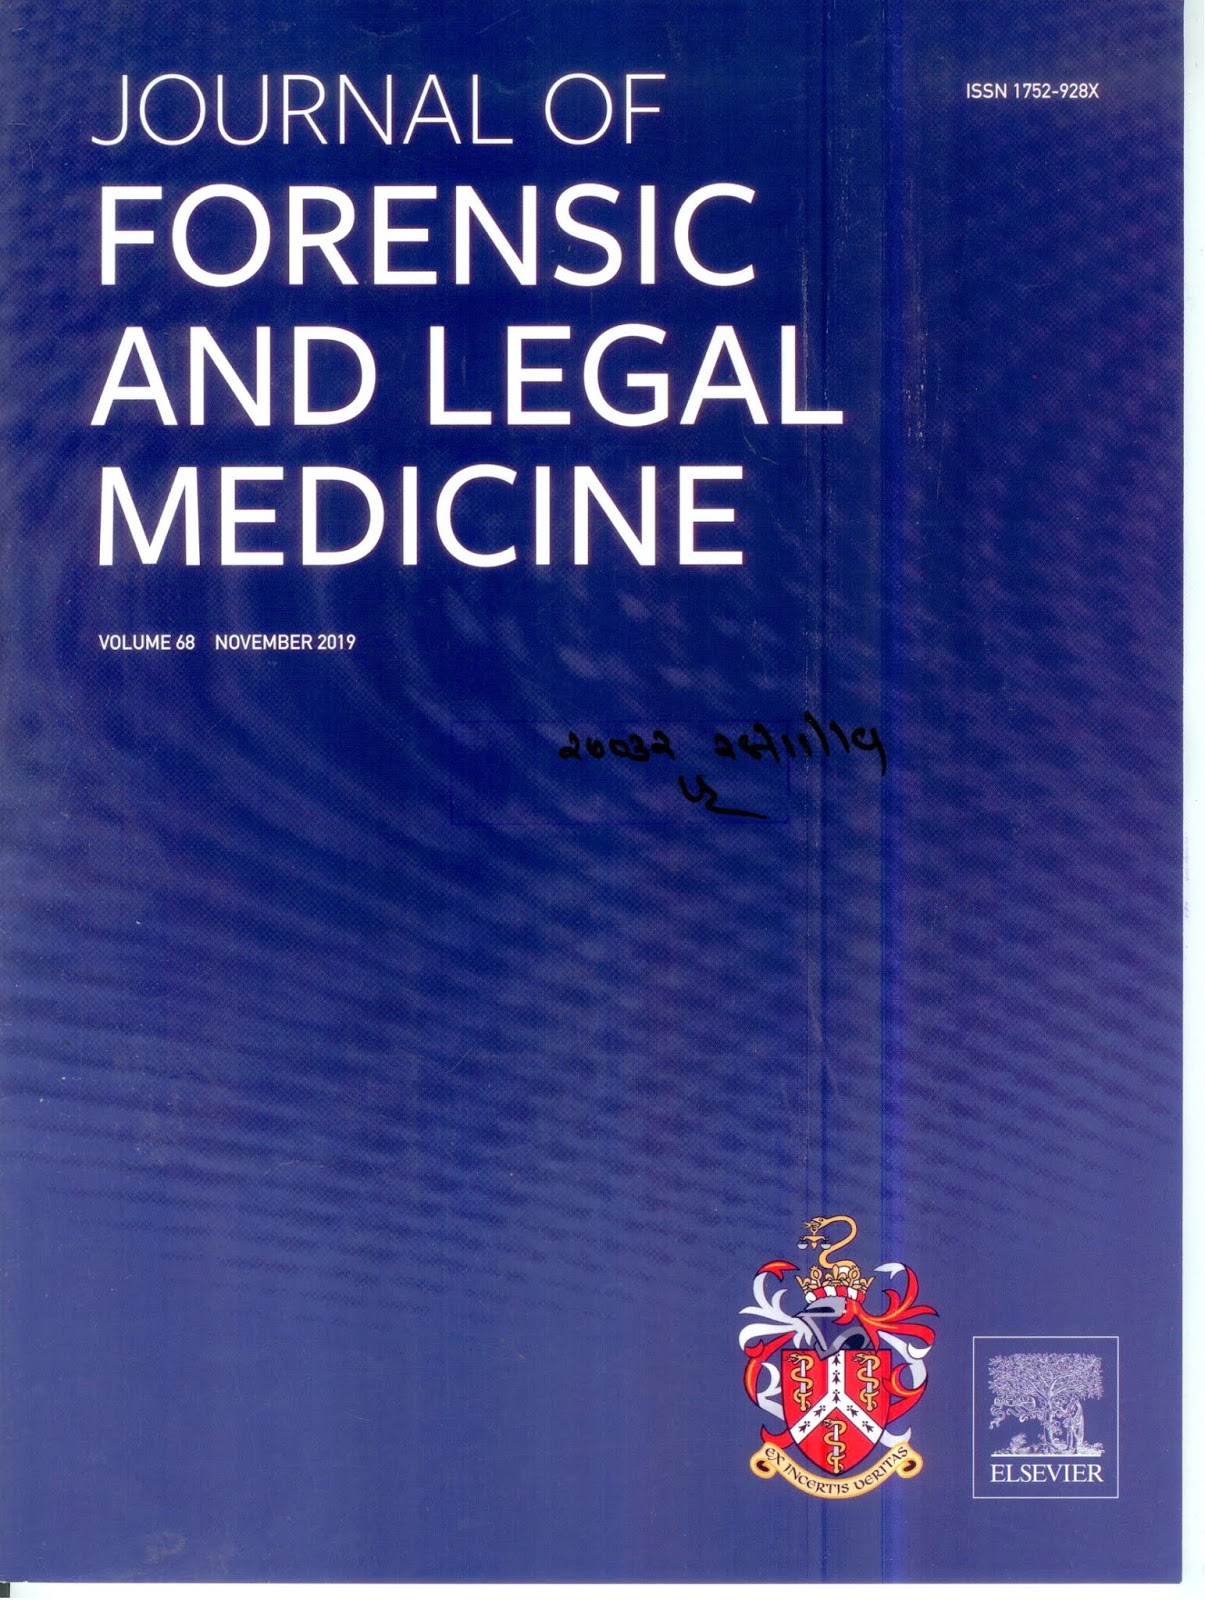 https://www.sciencedirect.com/journal/journal-of-forensic-and-legal-medicine/vol/68/suppl/C